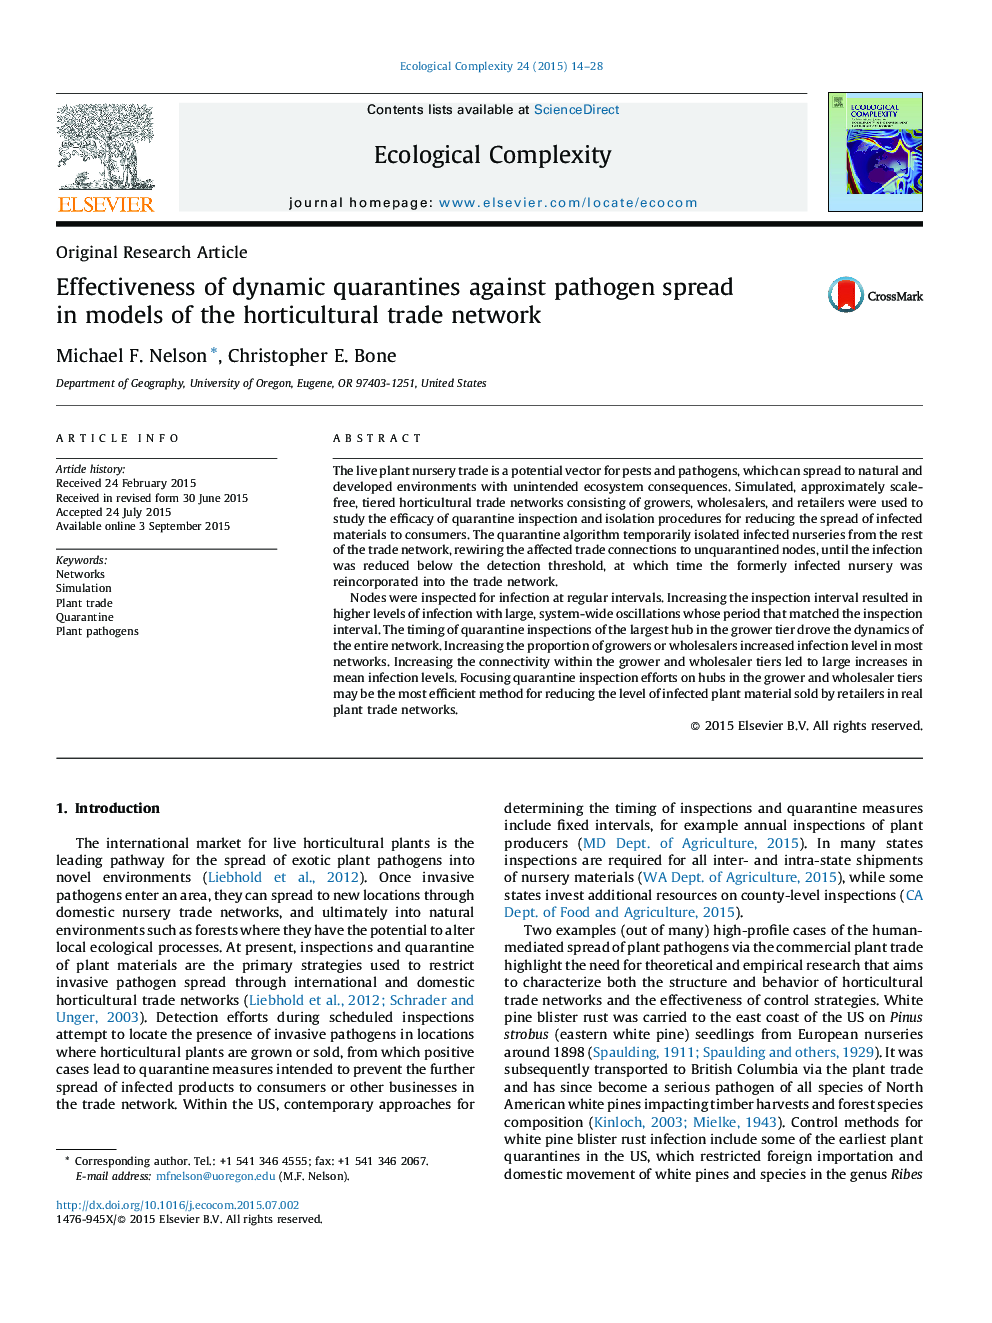 Effectiveness of dynamic quarantines against pathogen spread in models of the horticultural trade network